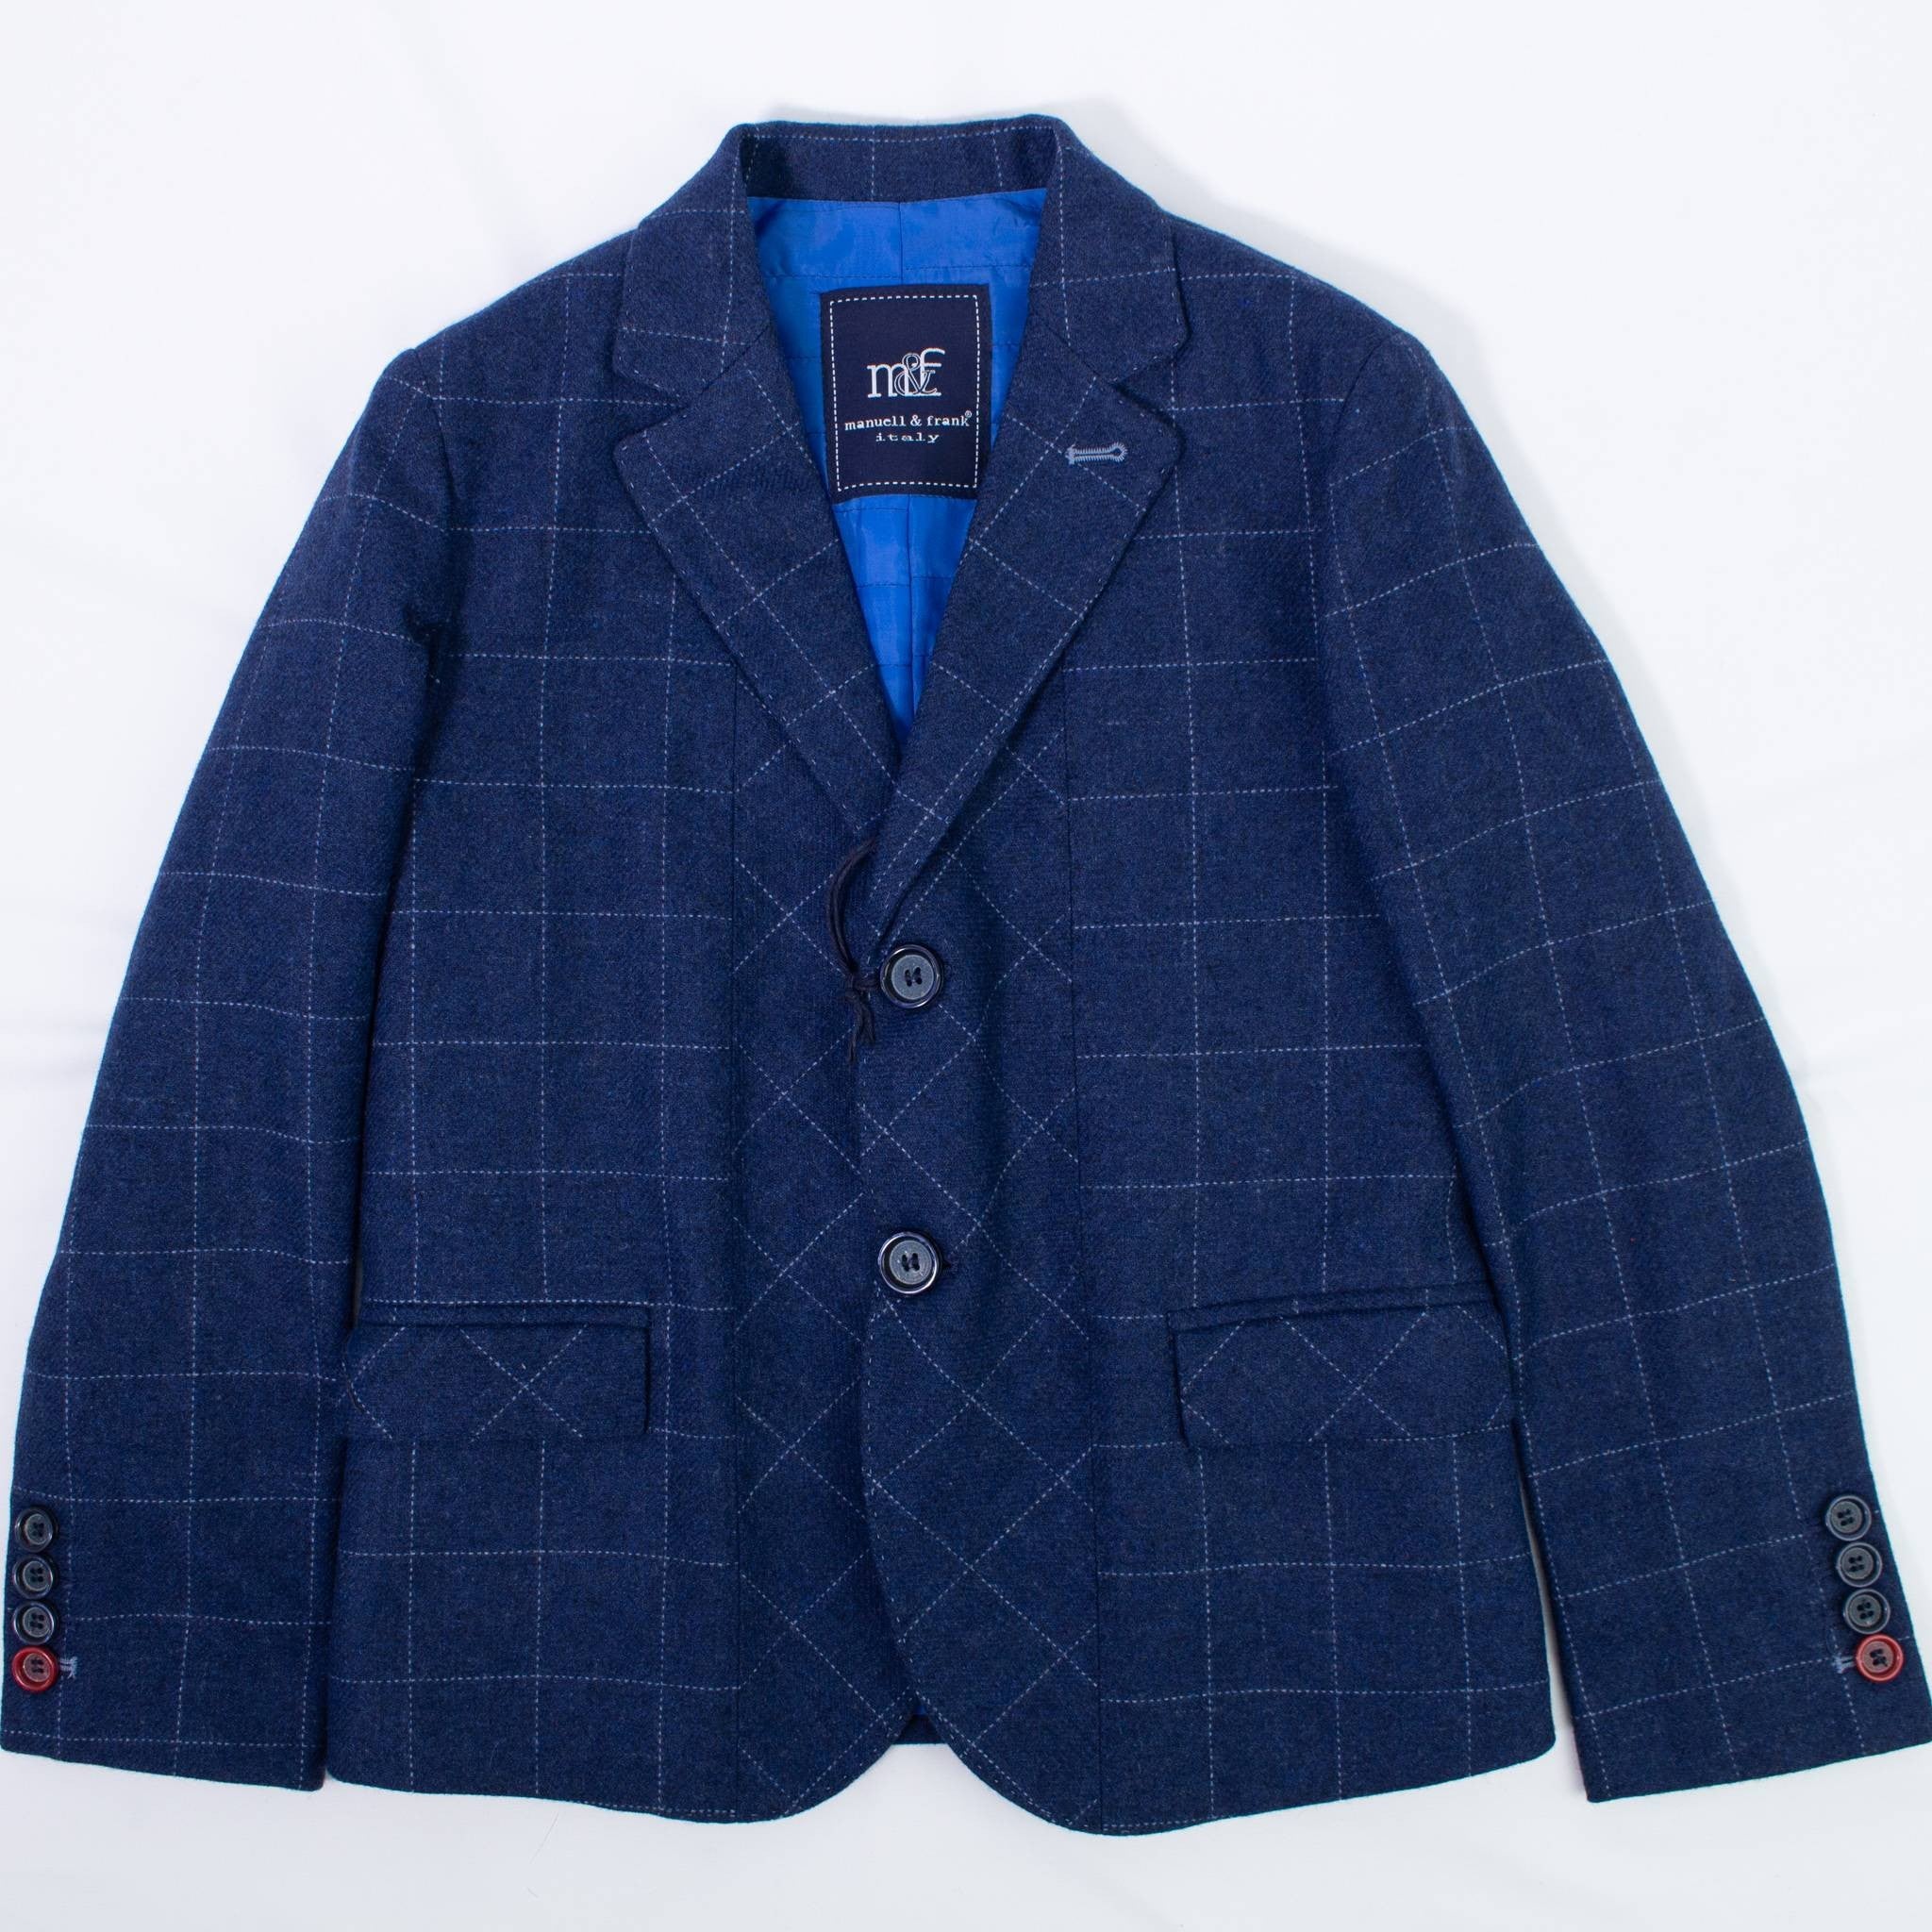 Giacca Elegante in Panno Bambino Manuell&Frank M2845 - MANUELL&FRANK - LuxuryKids